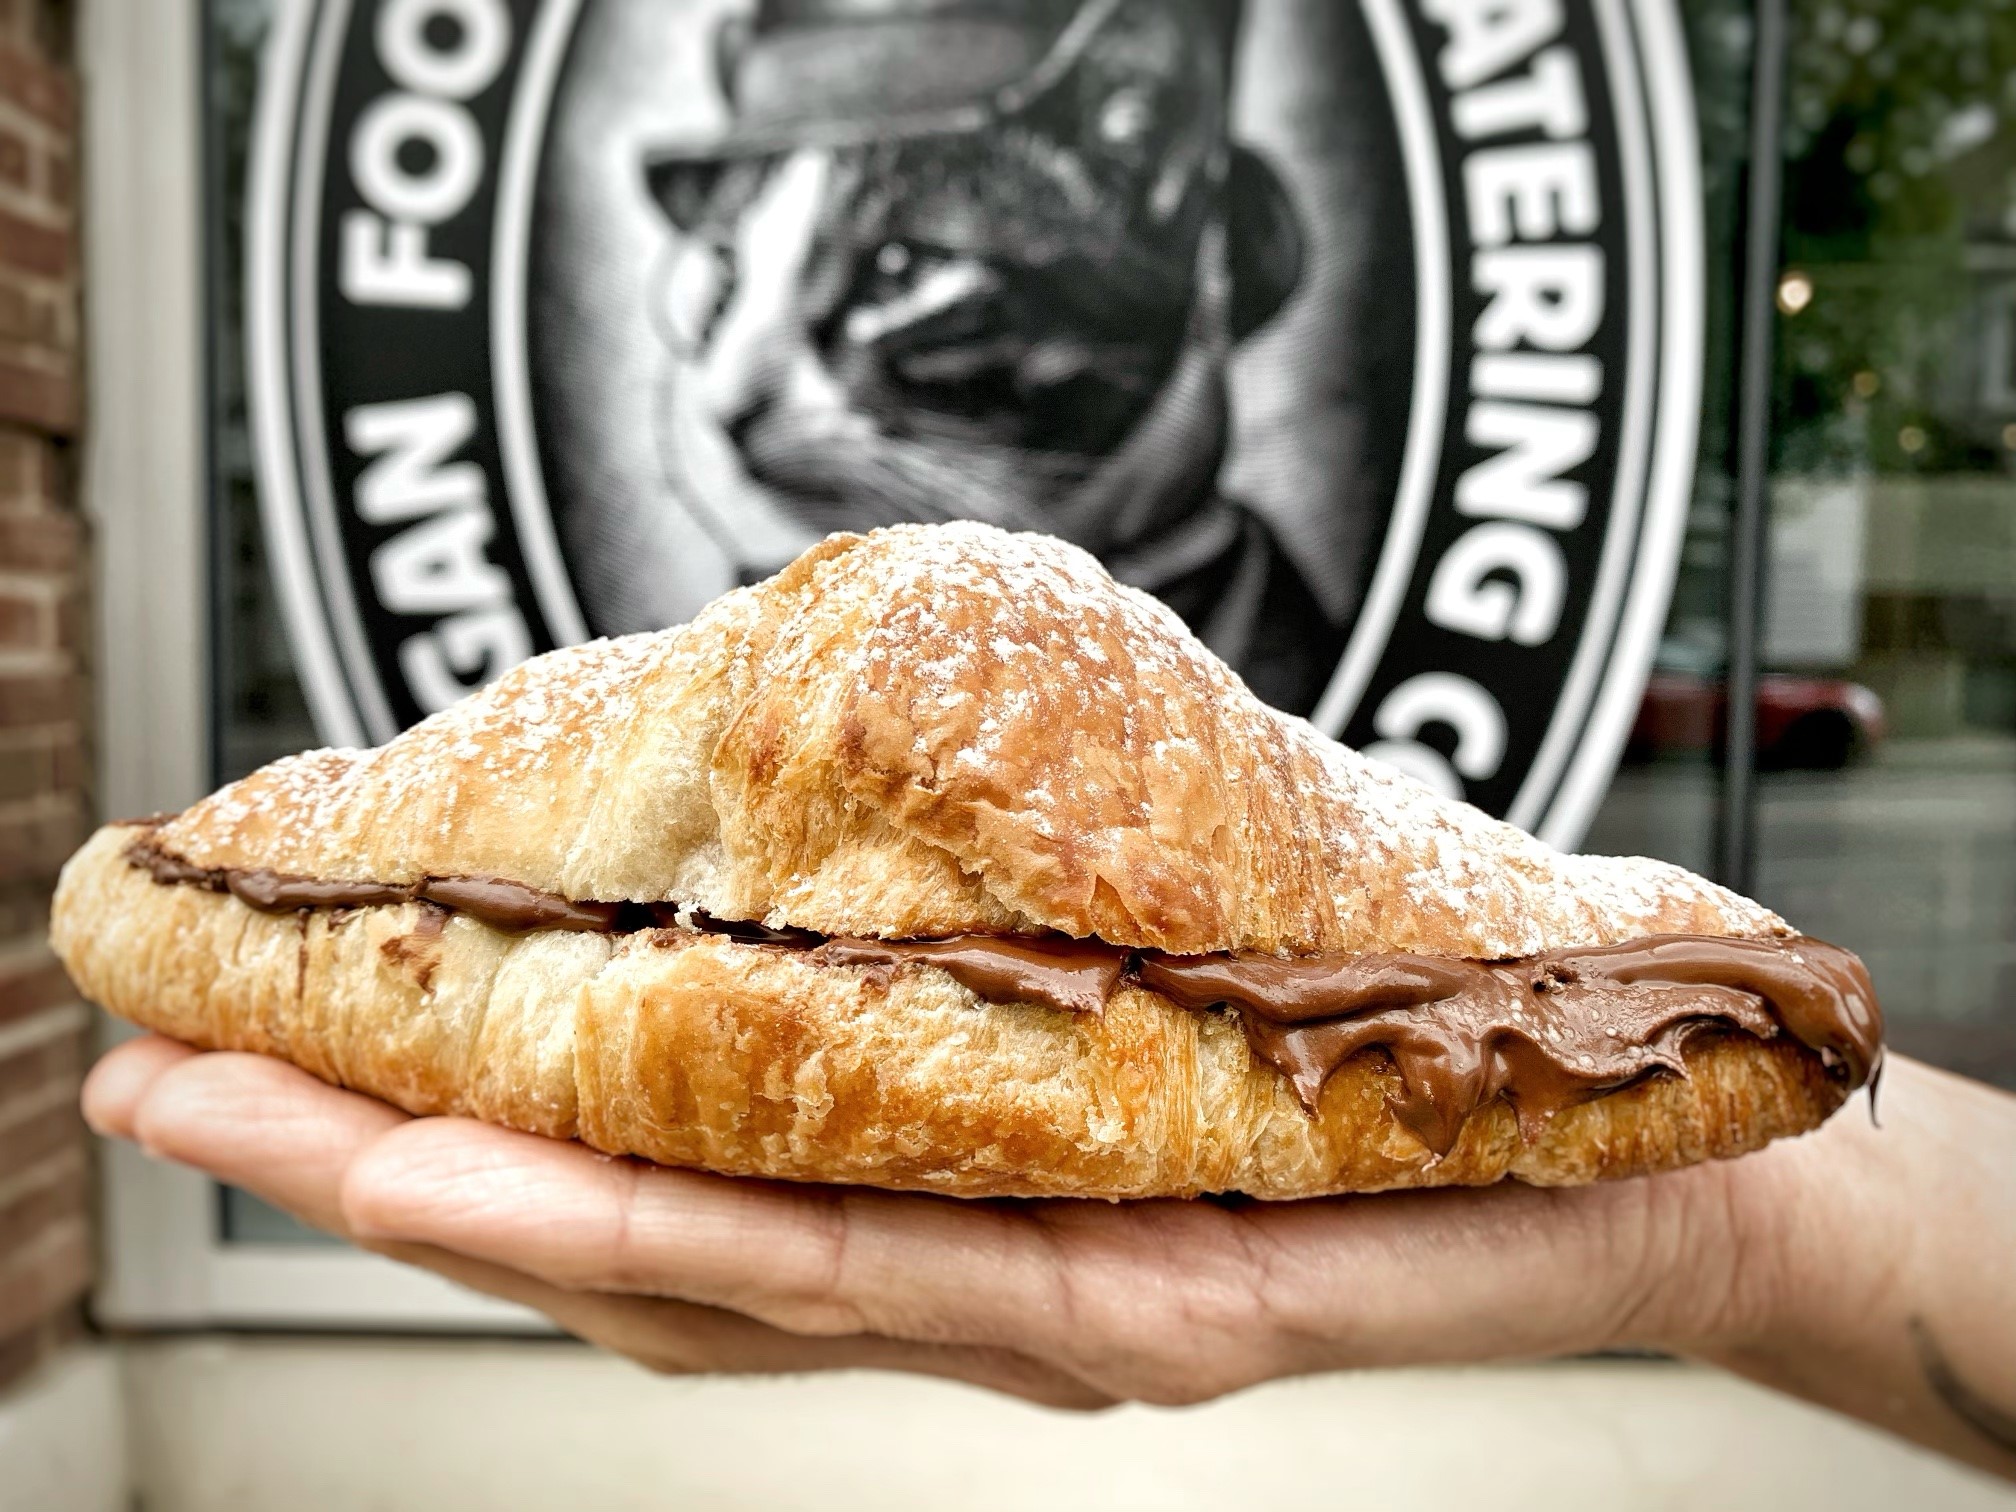 Chocolate croissant from The Animal Liberation Kitchen in Toronto